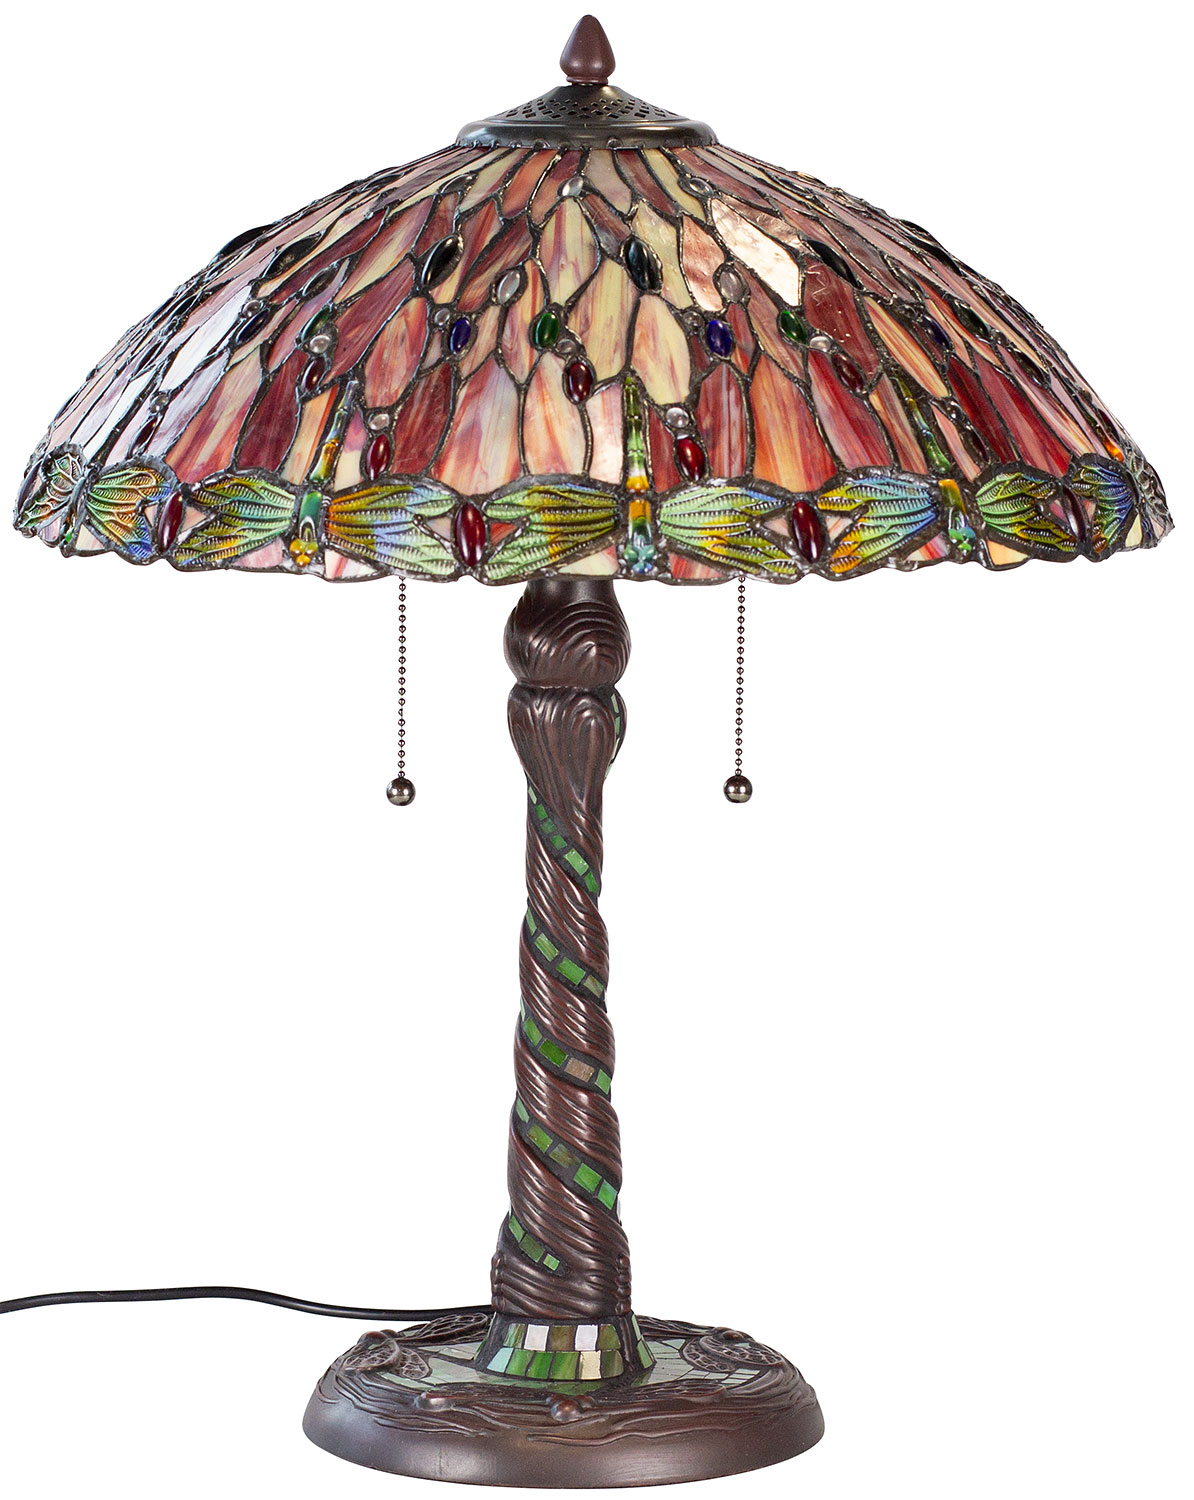 Table lamp "Dragonfly" - after Louis C. Tiffany